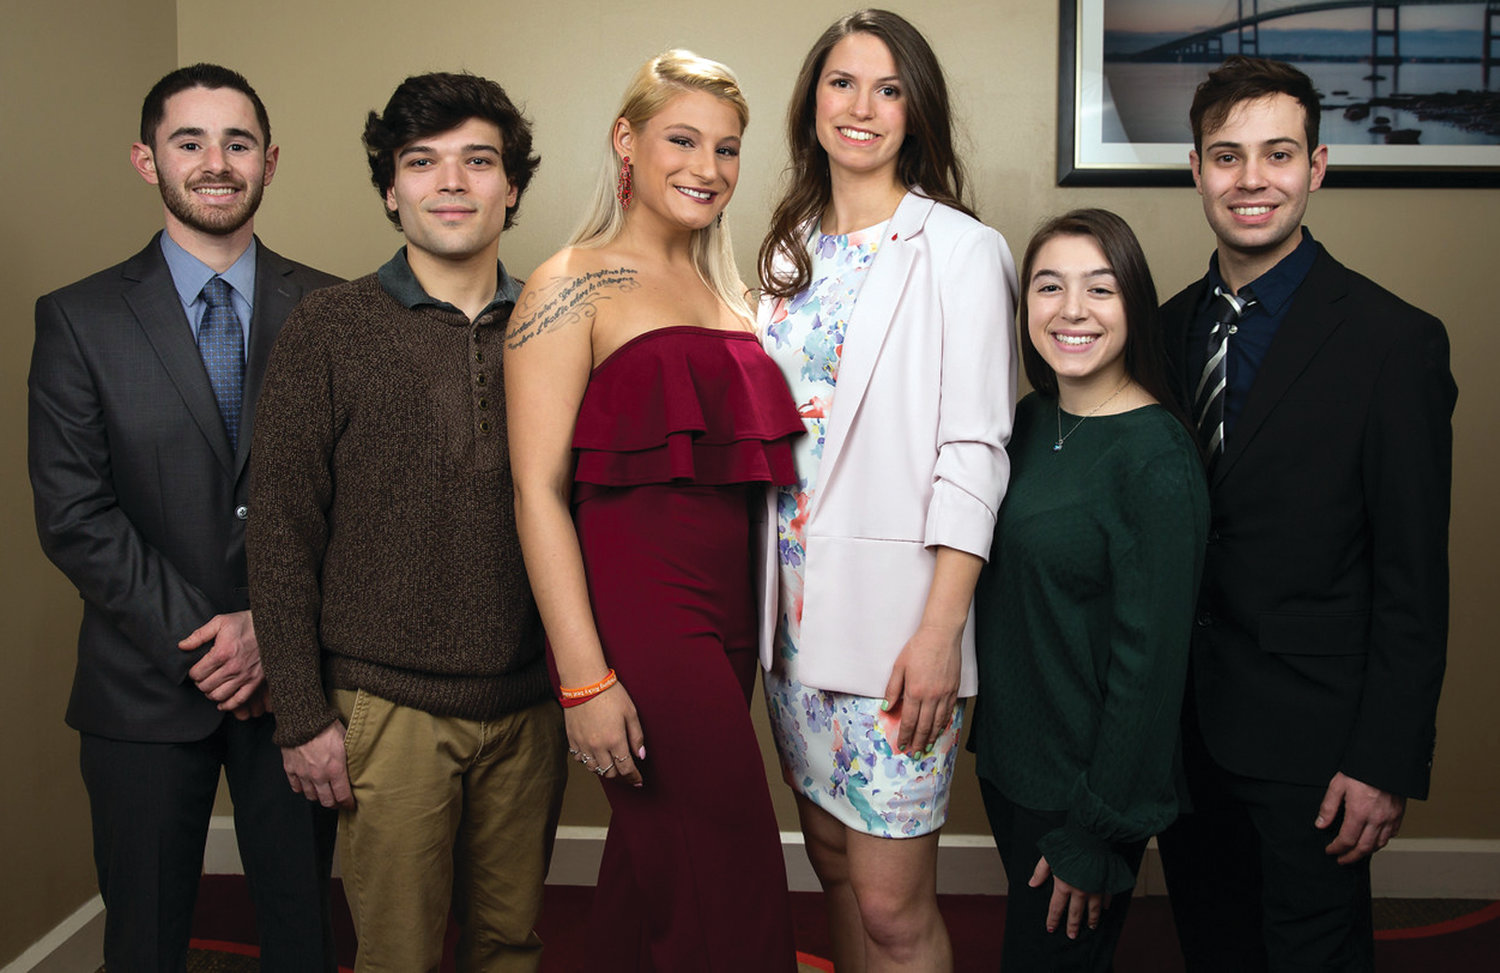 TERRIFIC TEAM: Stephanie Lemoi, fourth from left, is one seven women hoping to be named the Leukemia & Lymphoma Society Rhode Island chapter’s 2019 Woman of the Year. She is joined by members of her team – Mathew Glass, Joseph Pezzullo, Allegra Graziano, Ashley Zannini and Daniel Proia. They will host a Funny4Funds comedy night benefit tomorrow at the Smithfield Elks starting at 7 p.m.